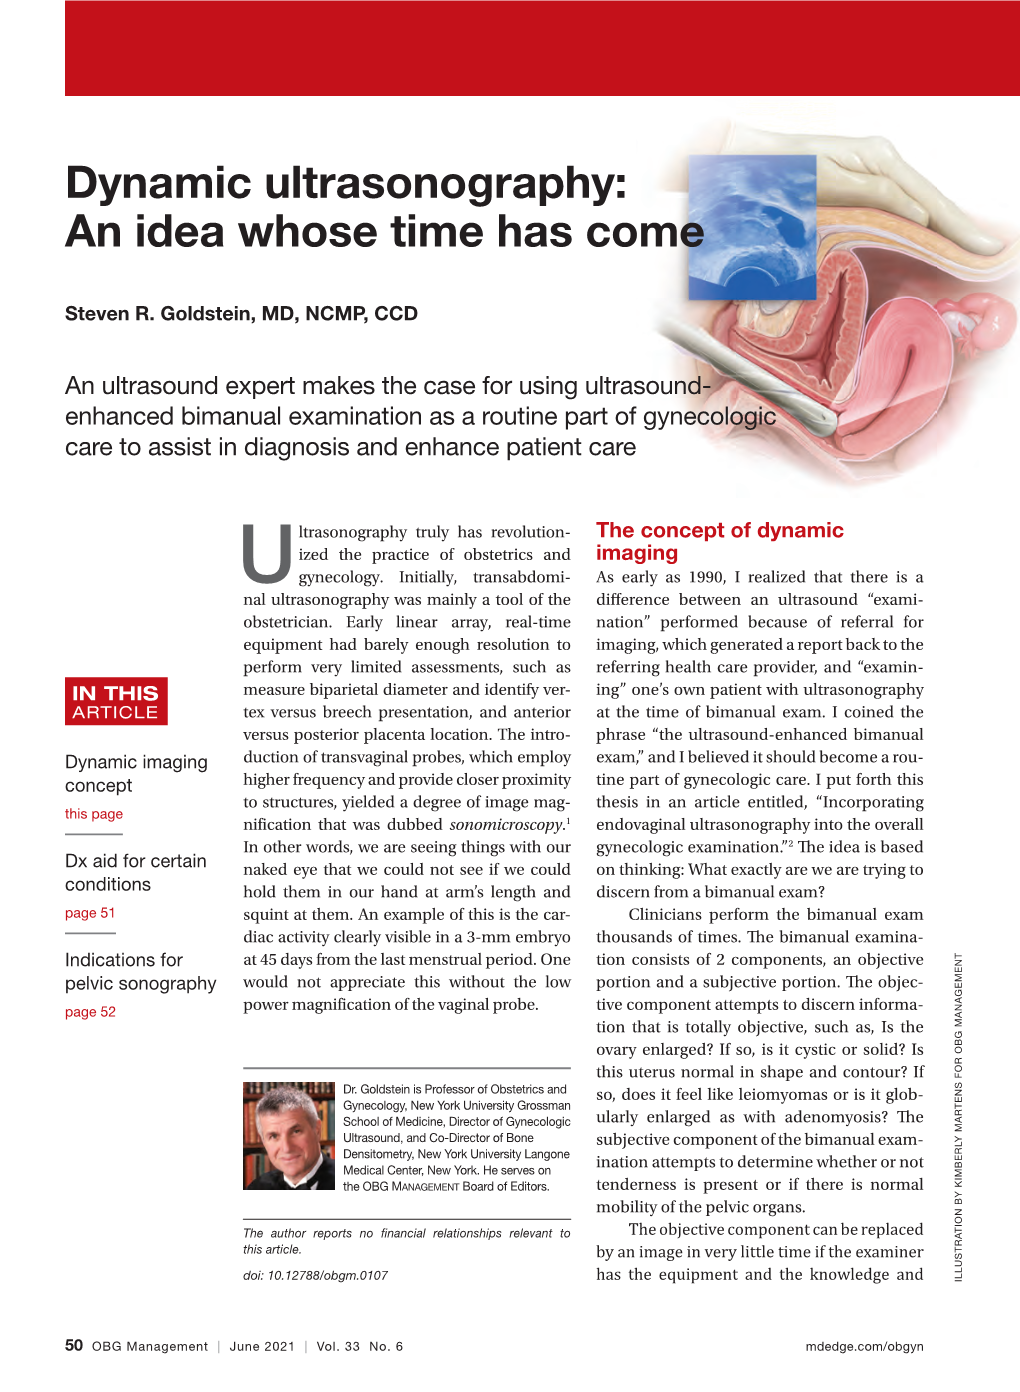 Dynamic Ultrasonography: an Idea Whose Time Has Come